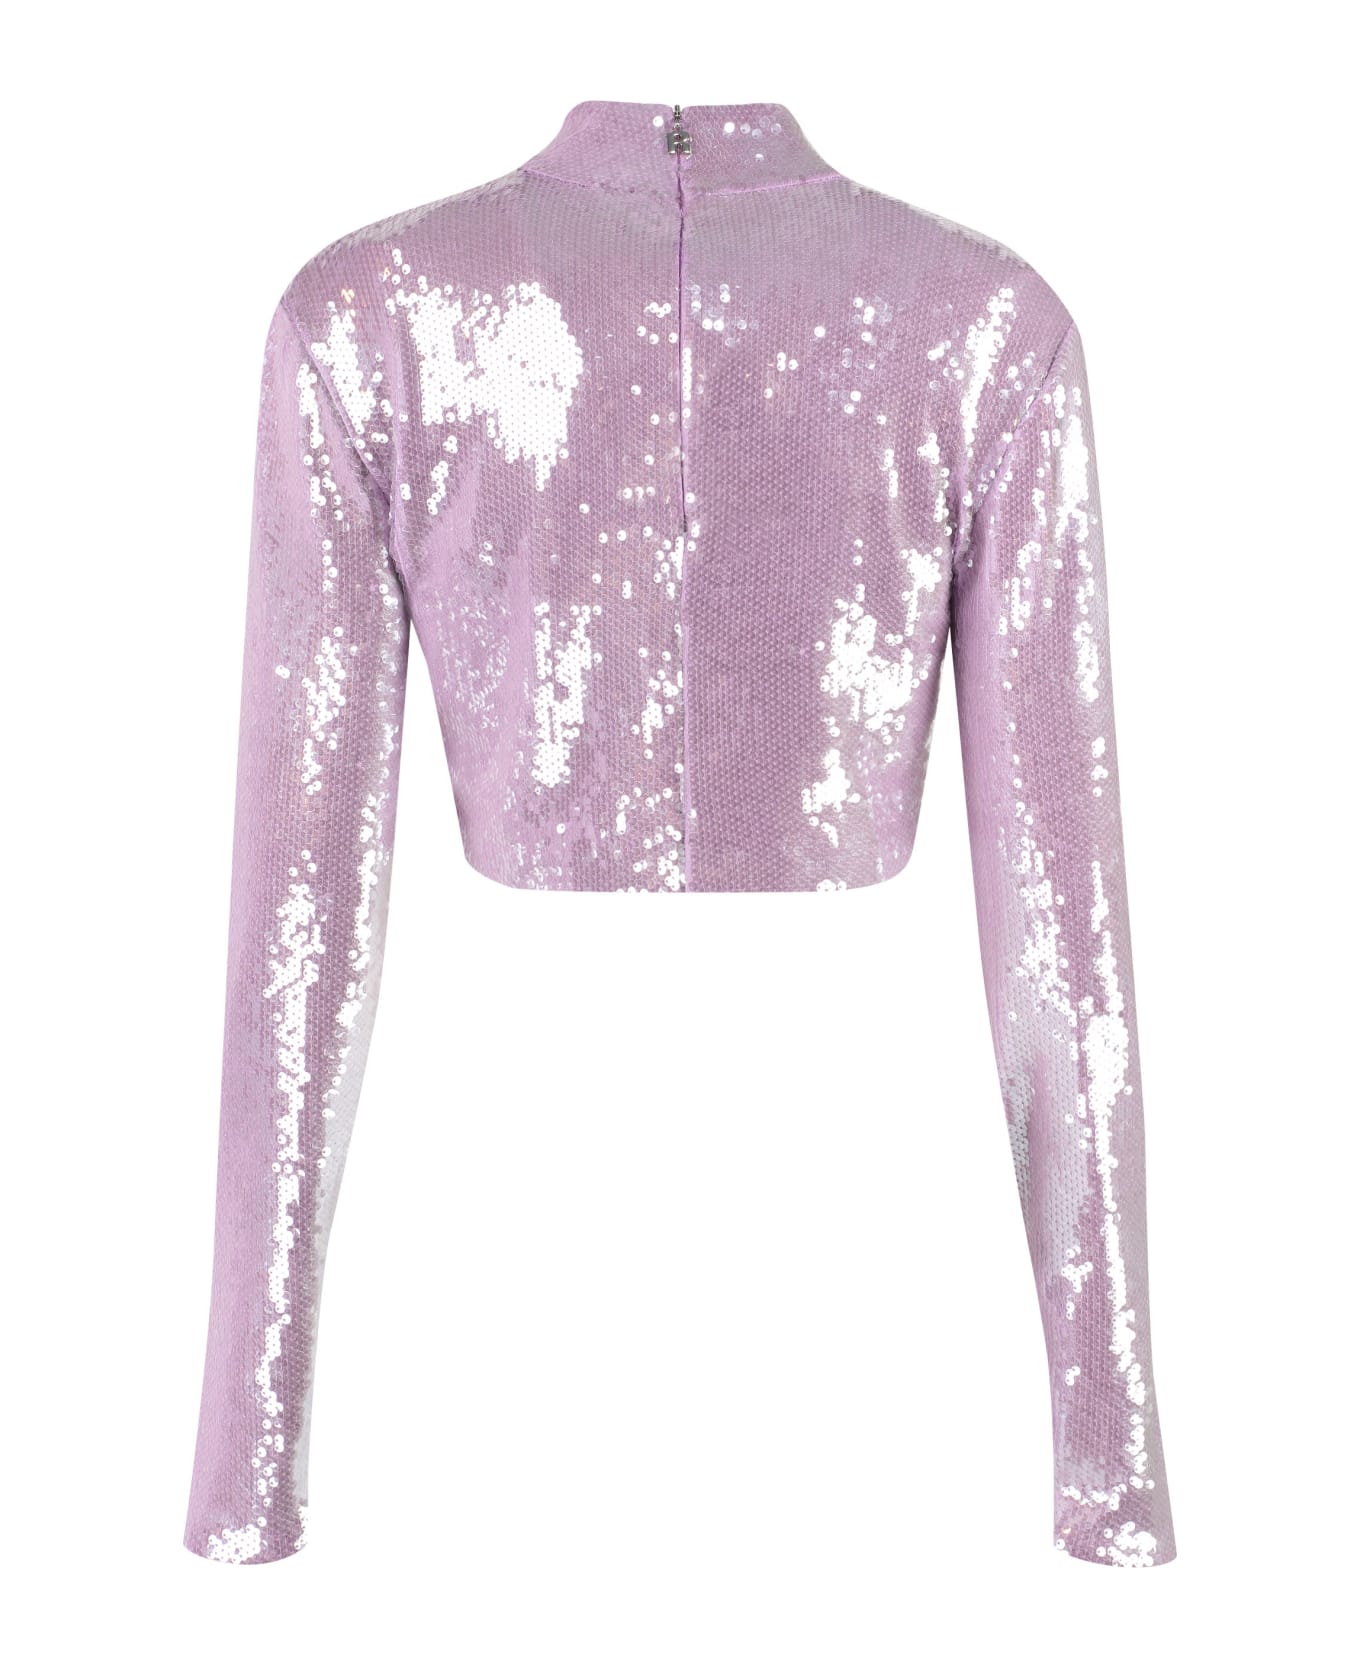 Rotate by Birger Christensen Long Sleeve Sequin Top - Lilac